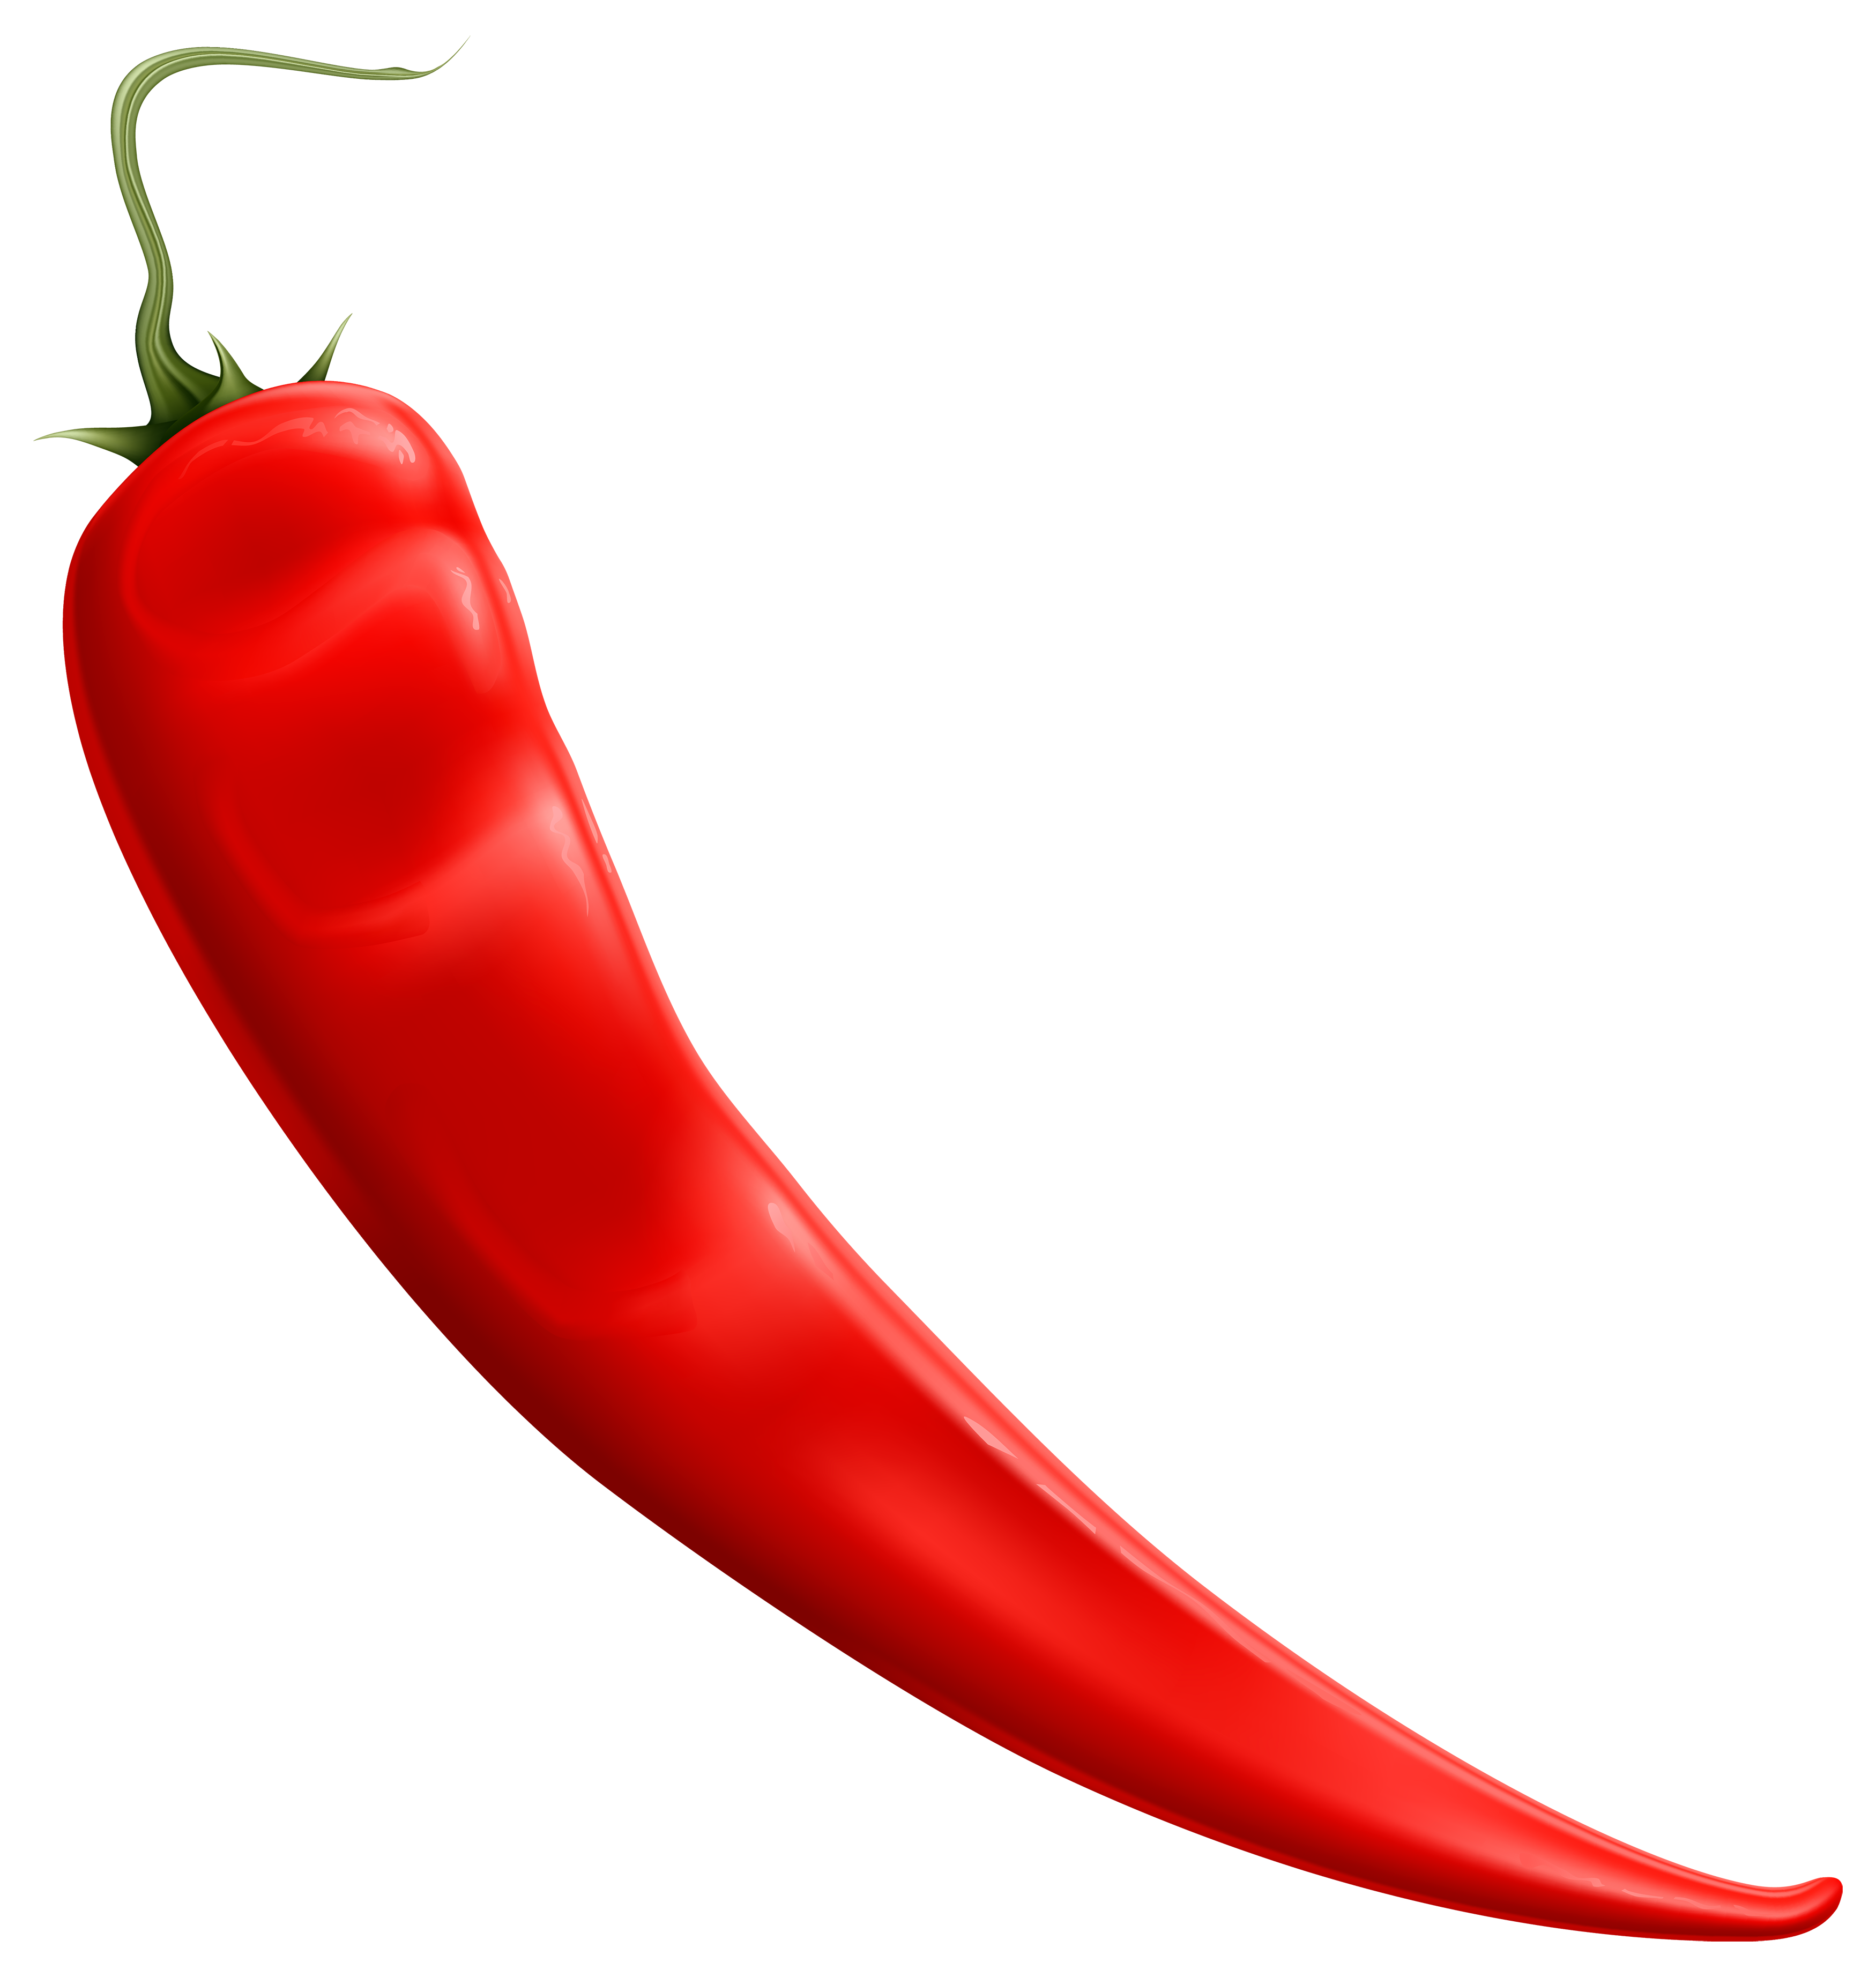 Pepper clipart chili pepper. Red png best web